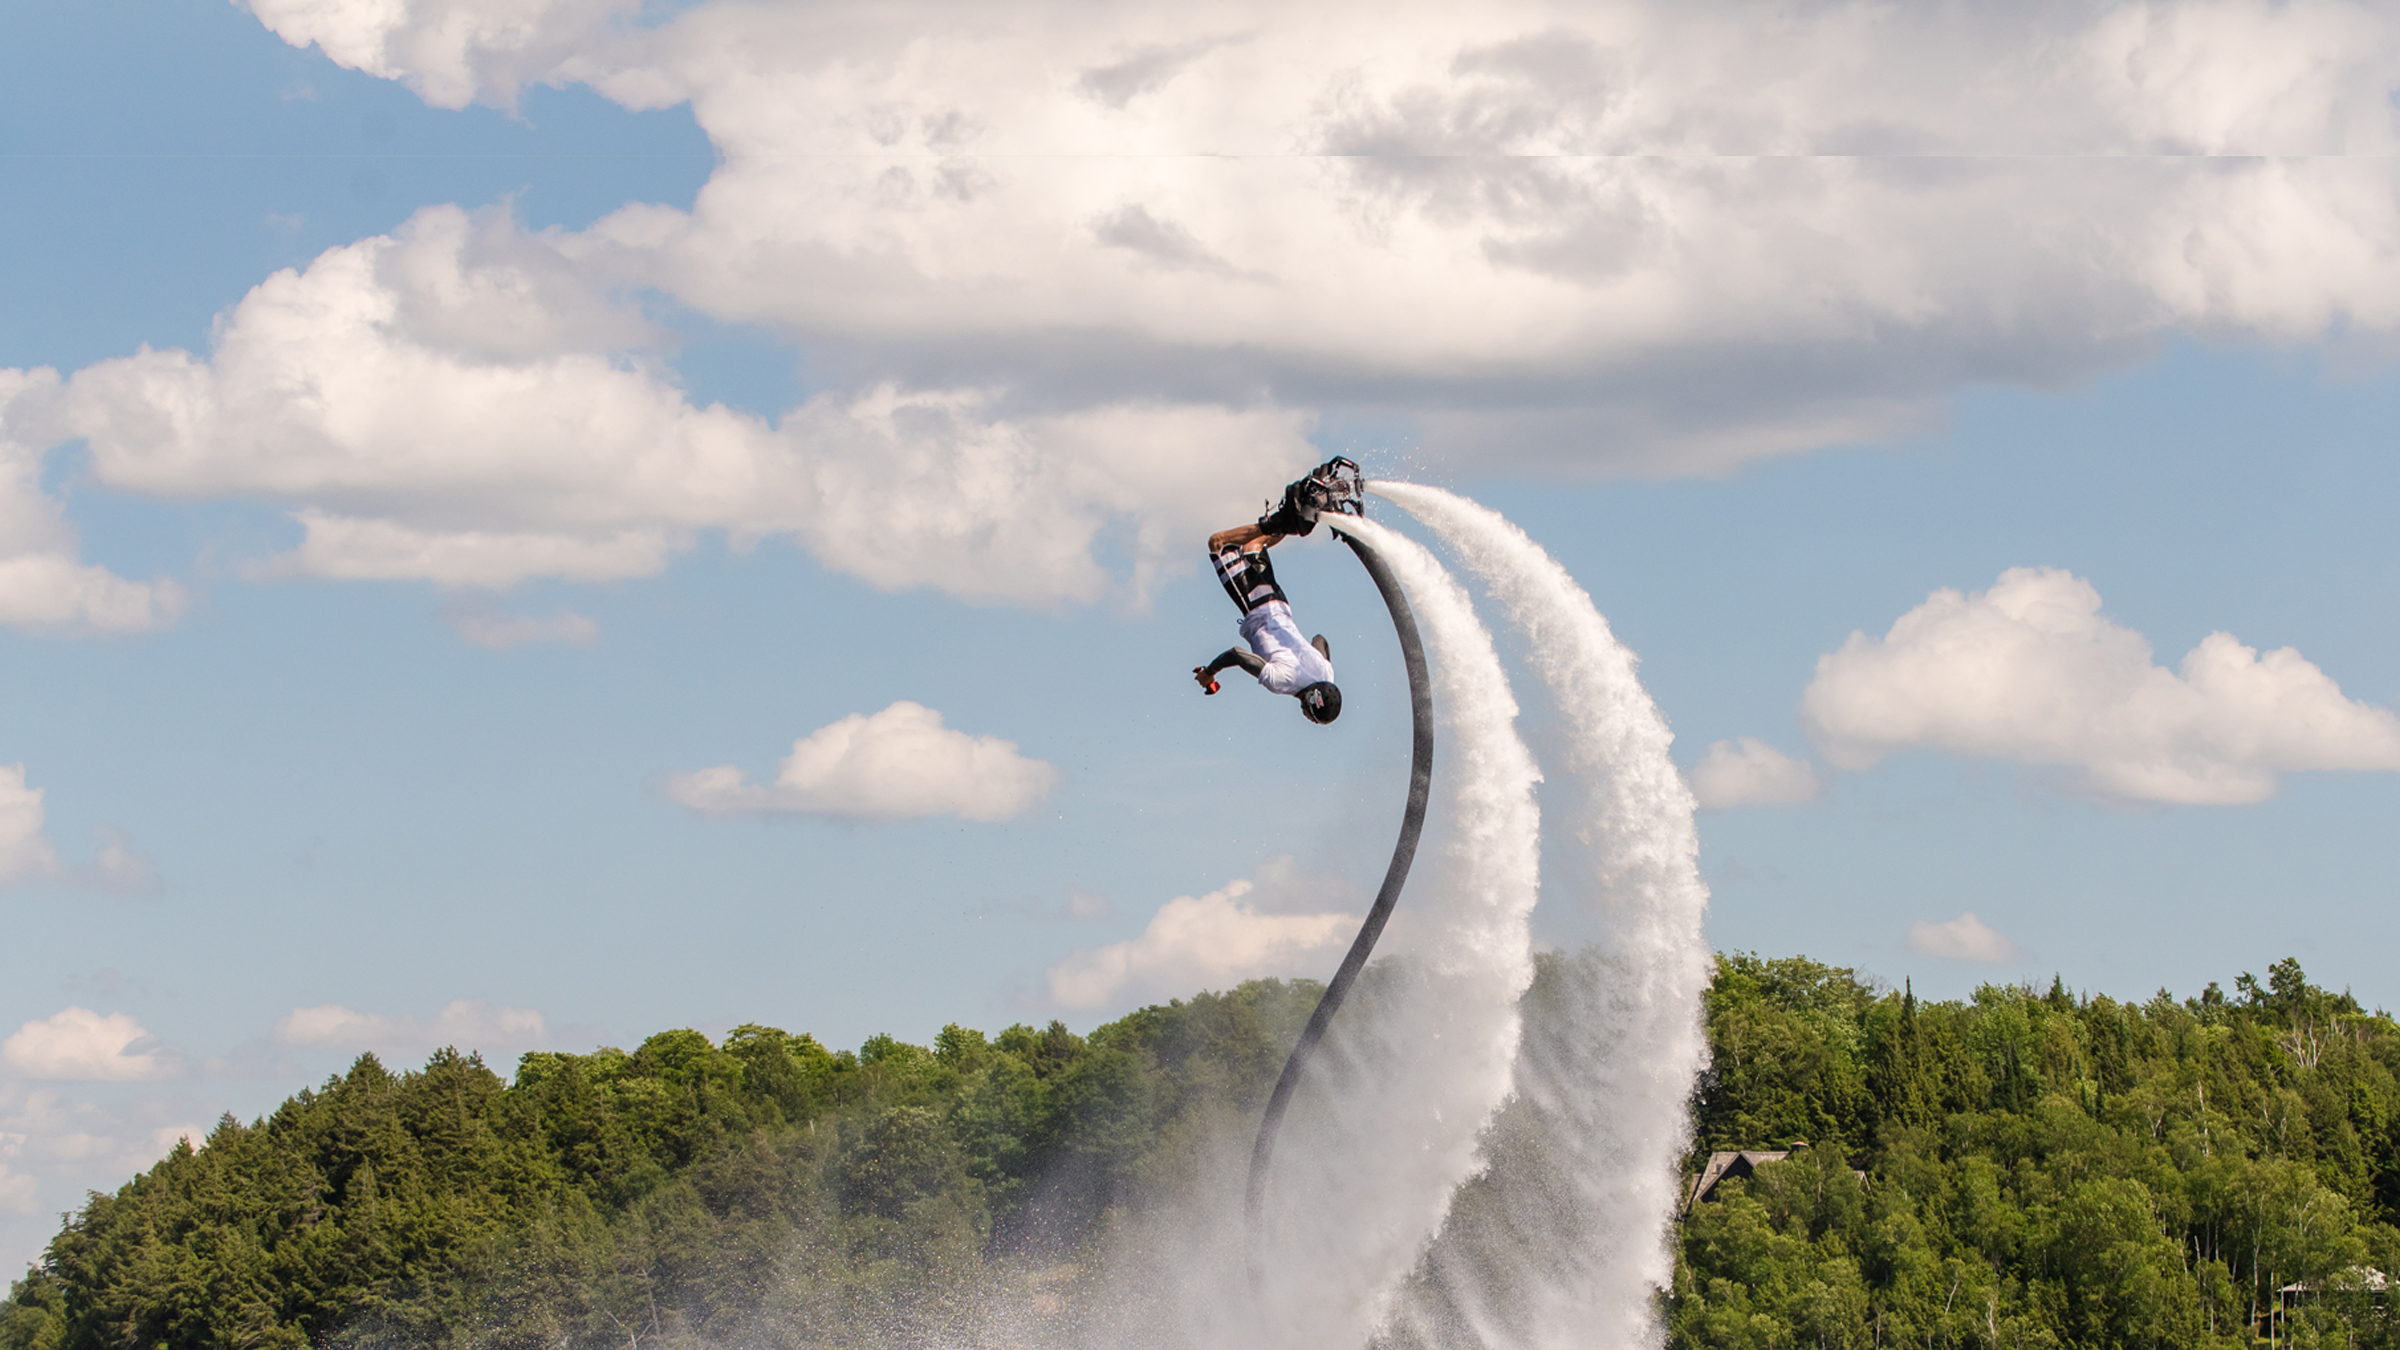 Flyboarding 101 with Geoff Hulet